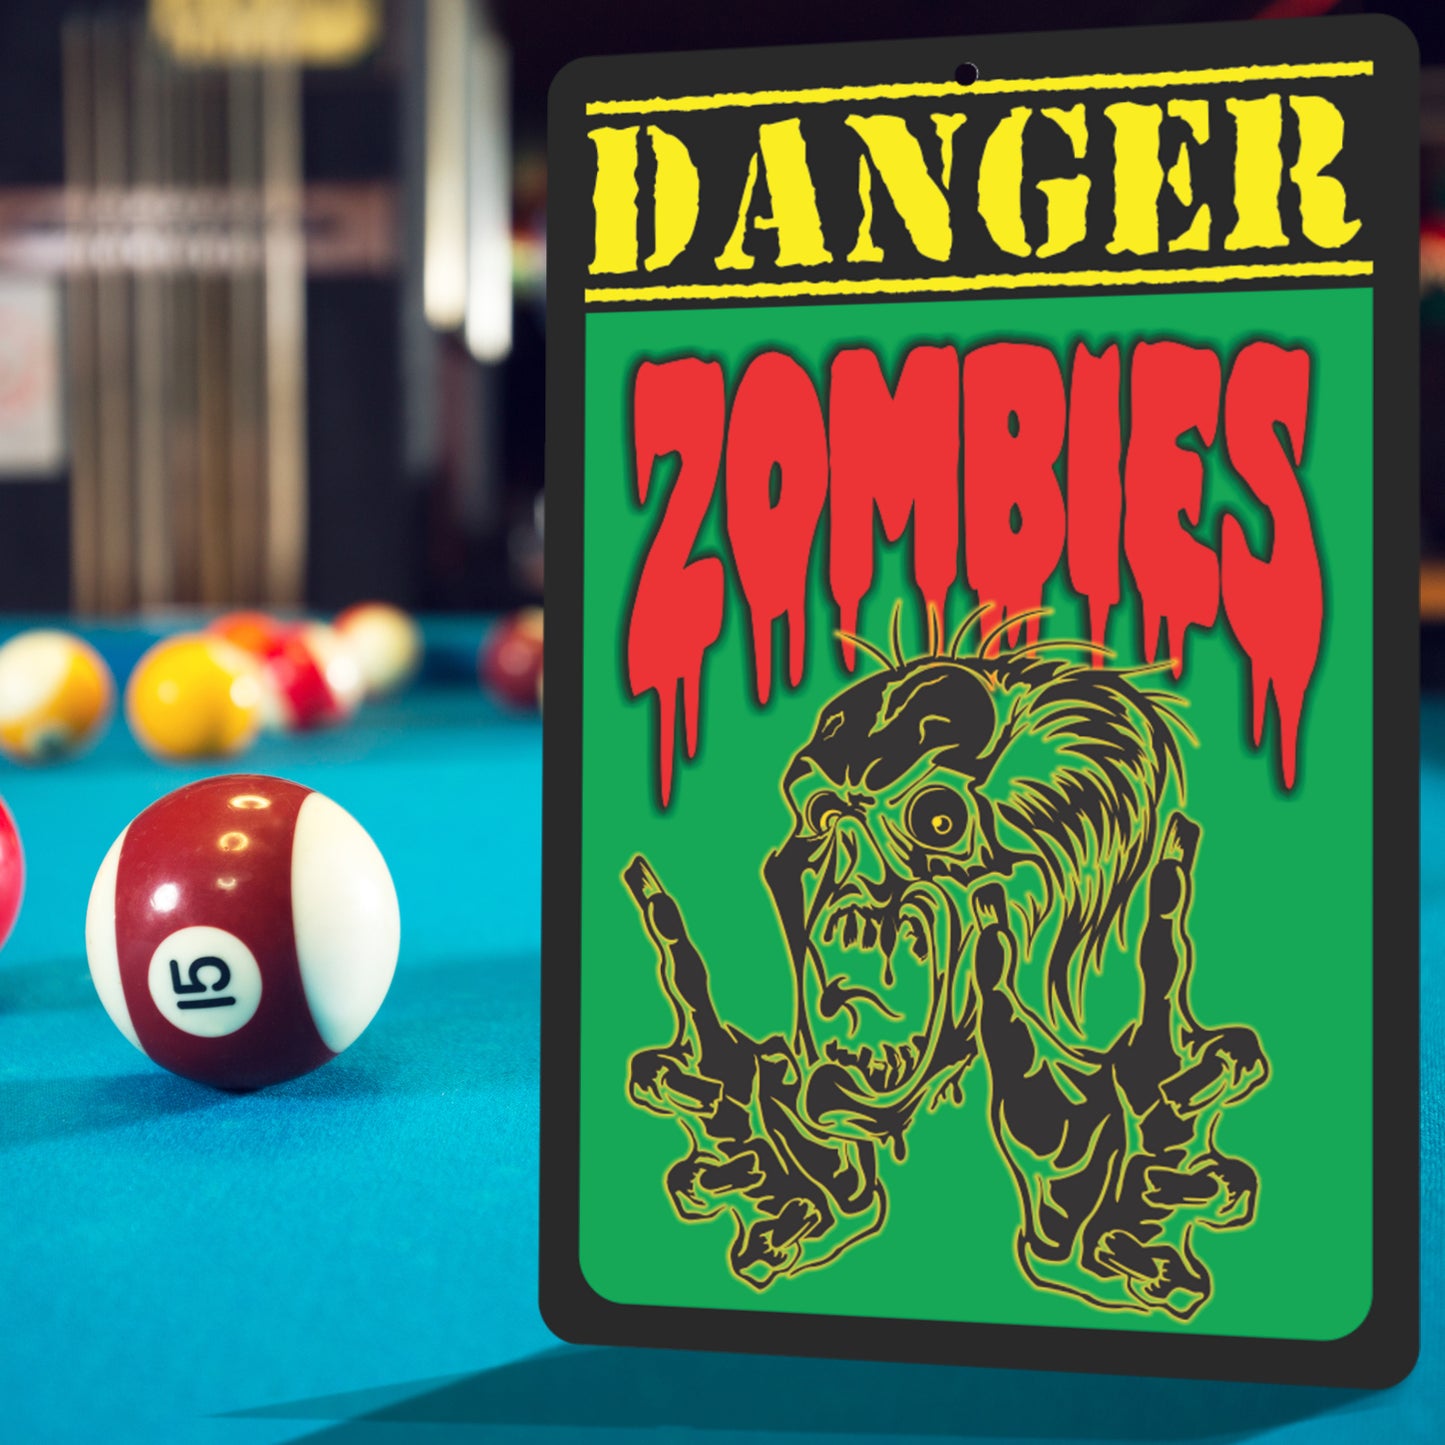 Danger Zombie Sign, Indoor and Outdoor Sign - Size 8 x 12